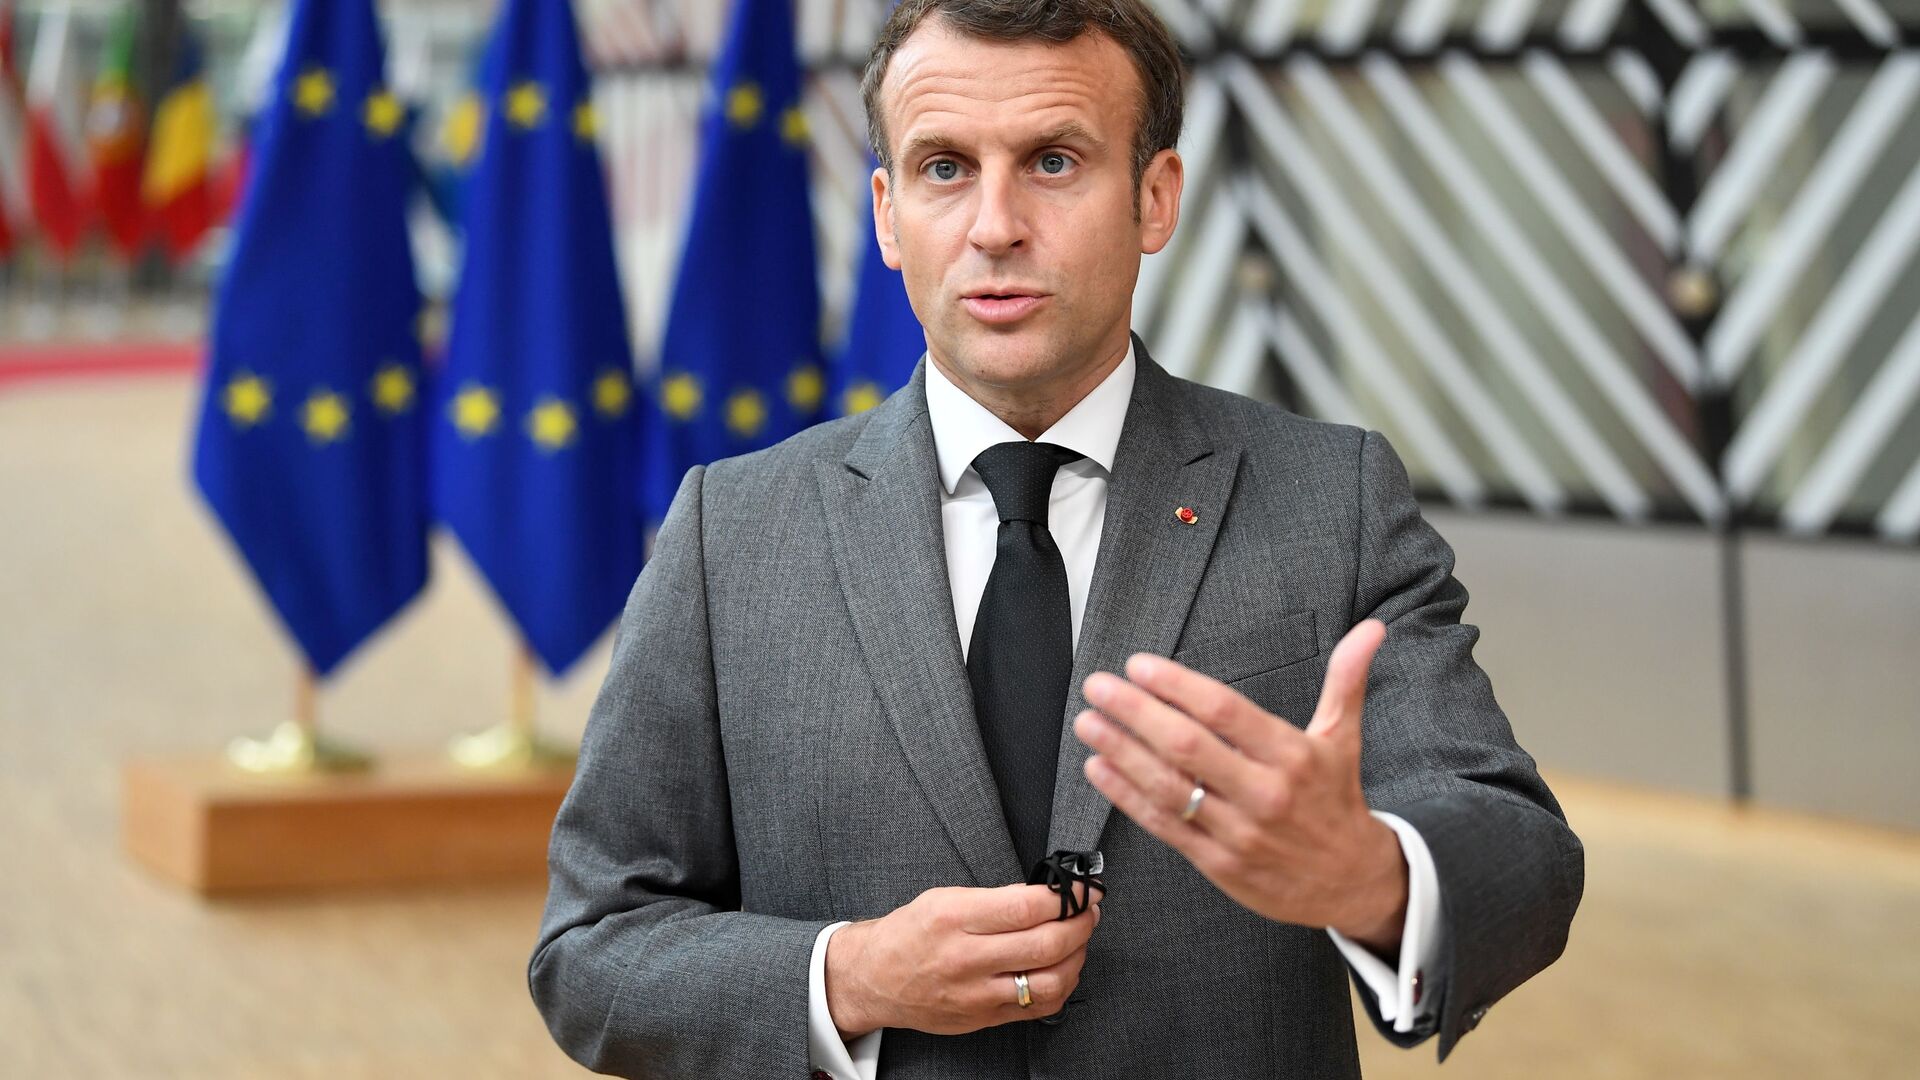 France's President Emmanuel Macron addresses the media as he arrives on the first day of the European Union summit at The European Council Building in Brussels, Belgium June 24, 2021. - Sputnik International, 1920, 09.02.2022